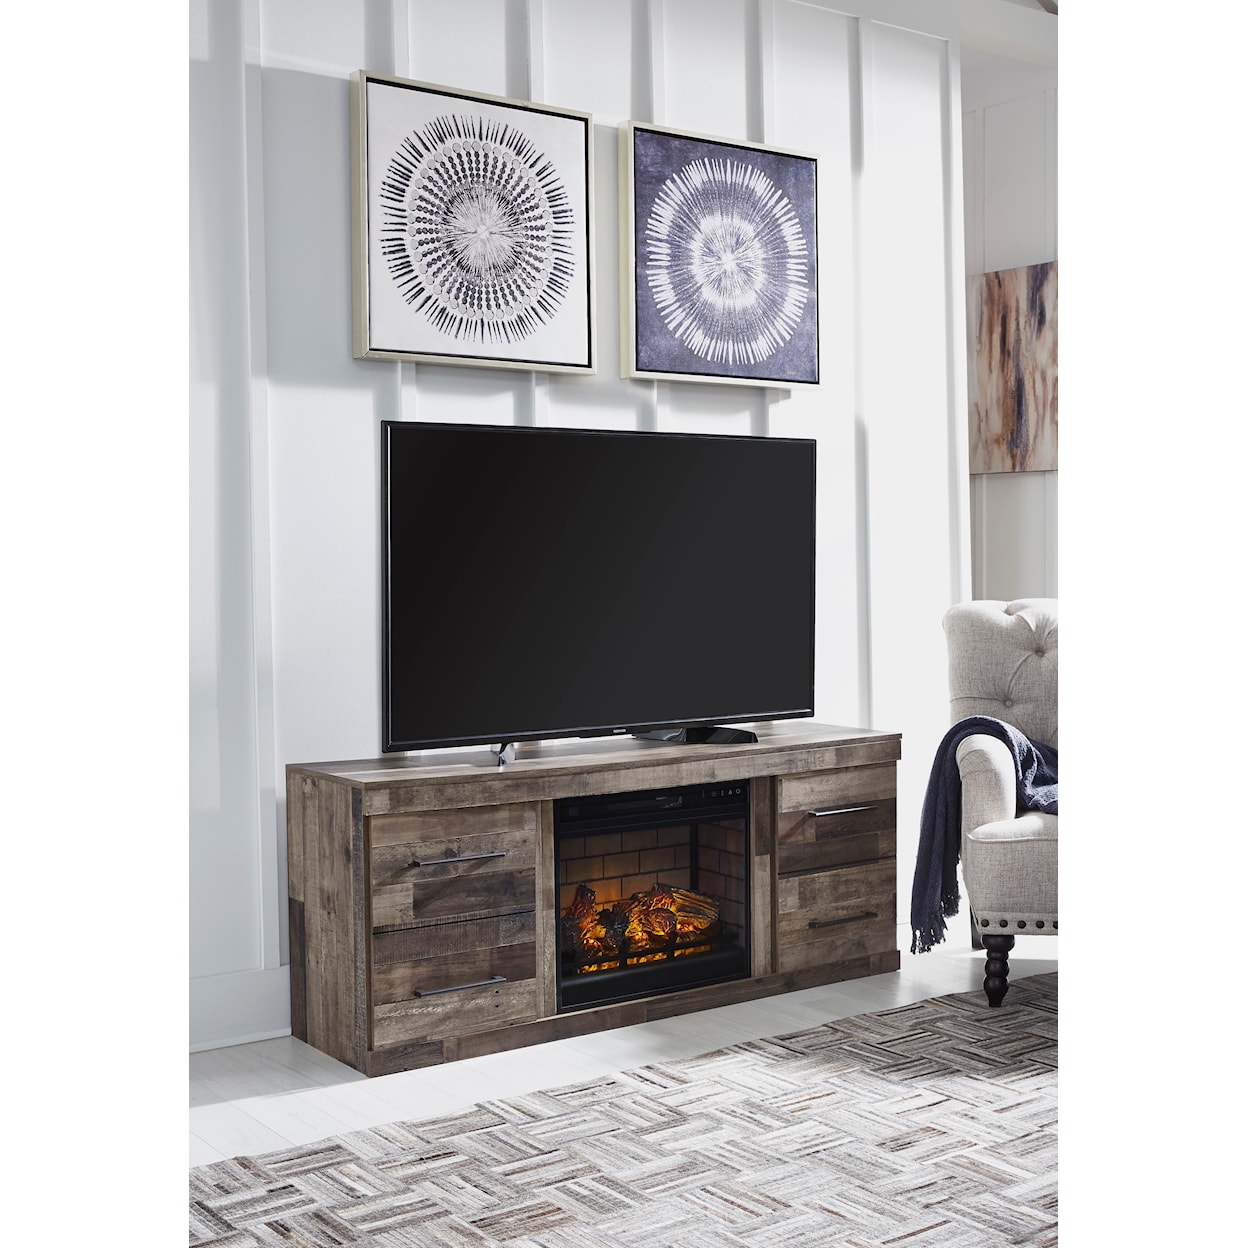 Ashley Furniture Signature Design Derekson 60" TV Stand with Electric Fireplace